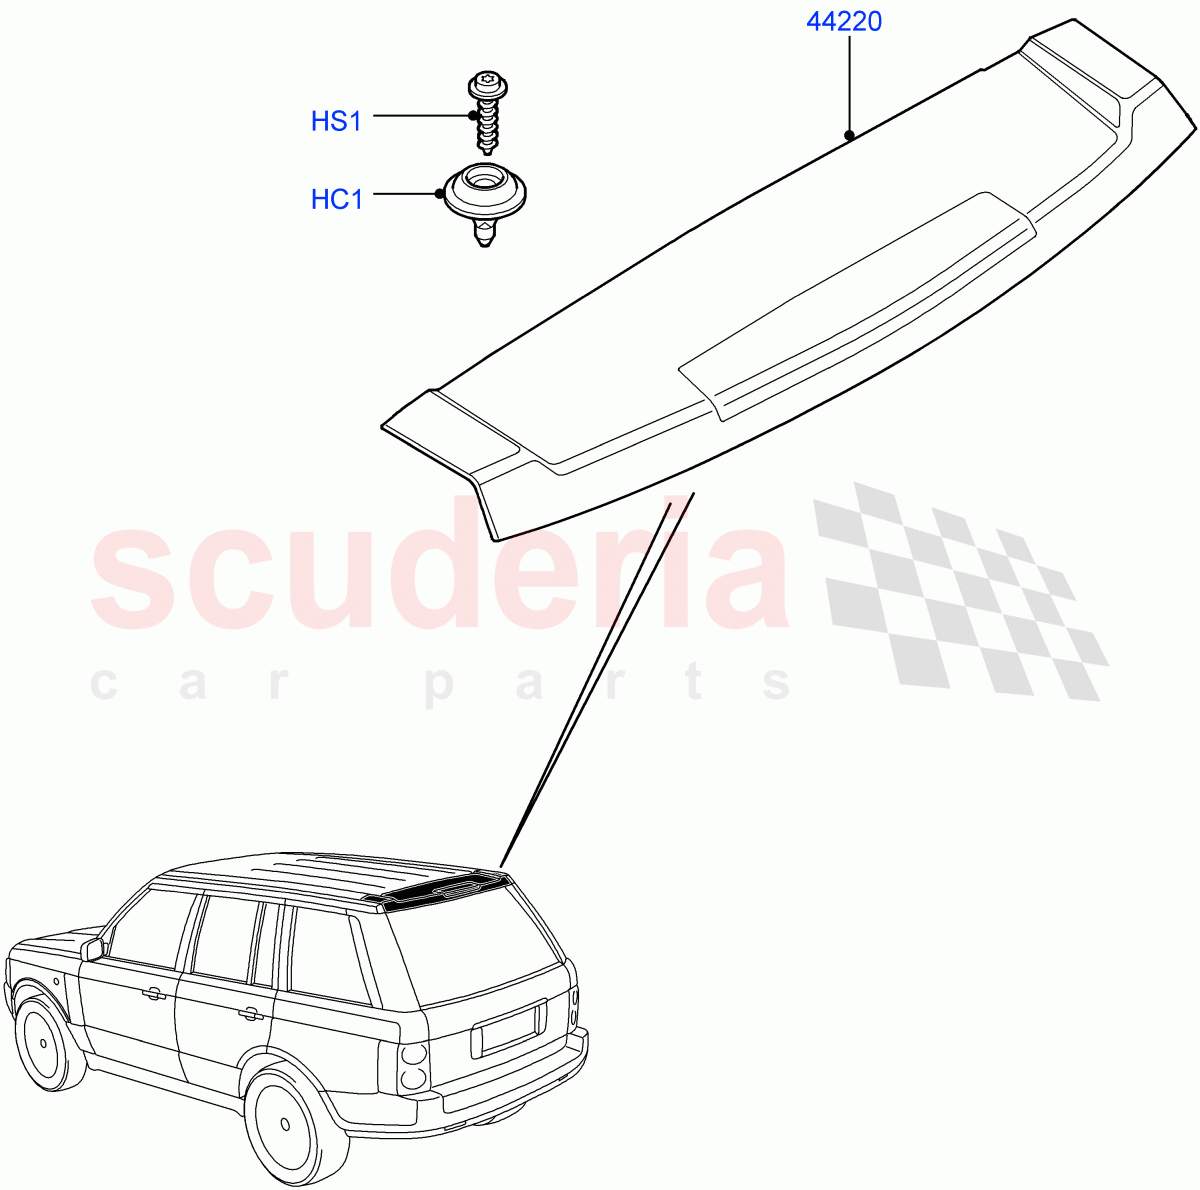 Spoiler And Related Parts((V)FROMAA000001) of Land Rover Land Rover Range Rover (2010-2012) [4.4 DOHC Diesel V8 DITC]